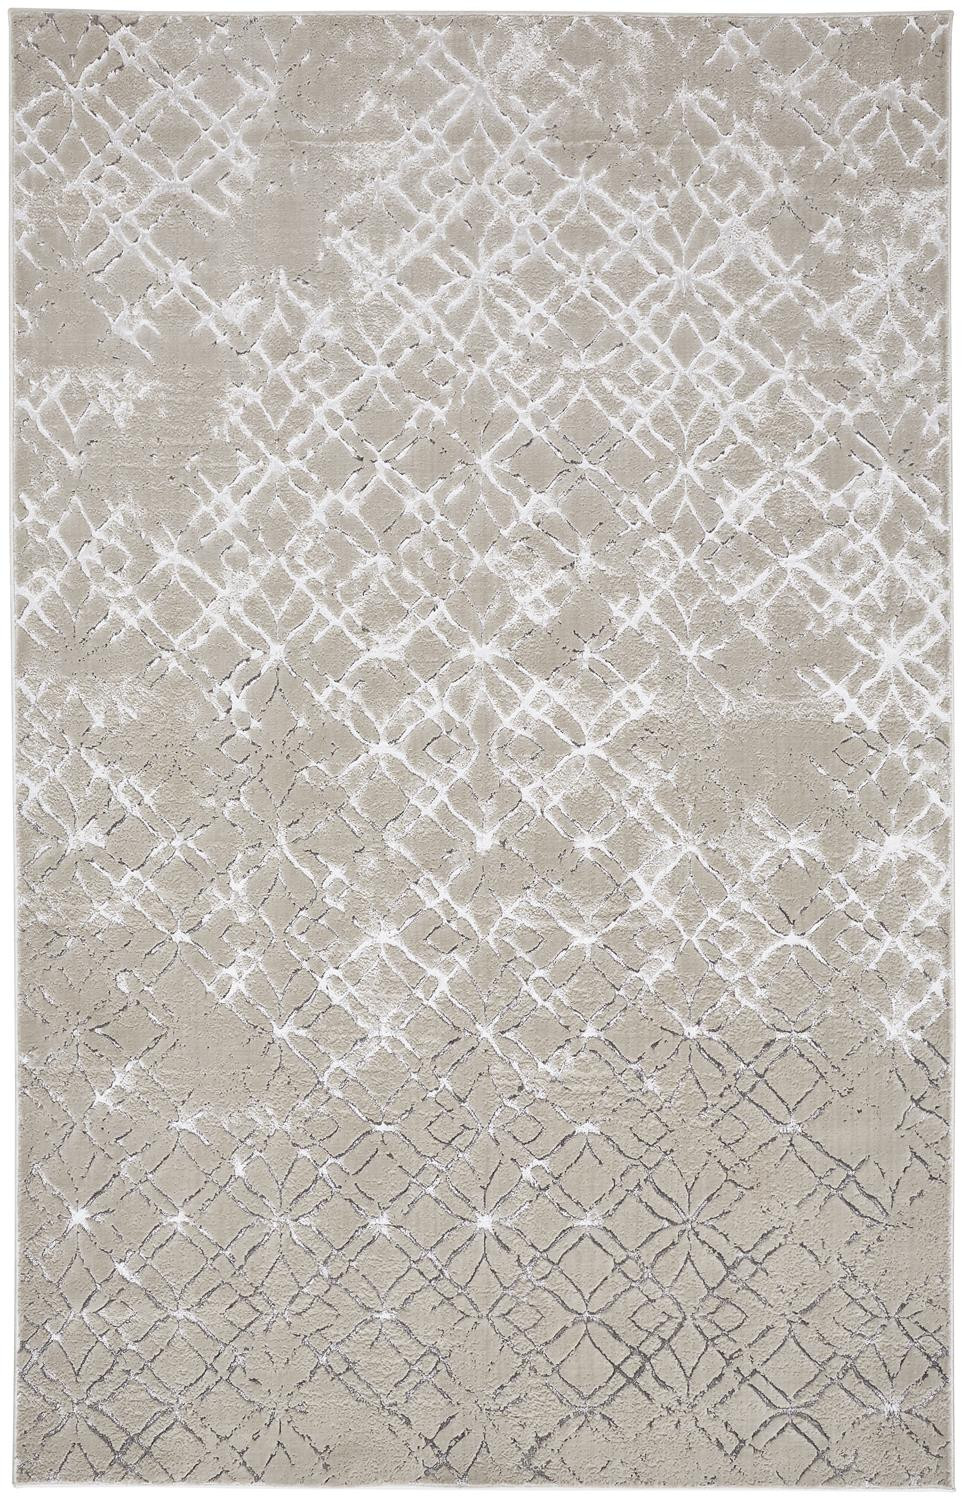 8' X 10' Silver Gray And White Abstract Area Rug-511496-1